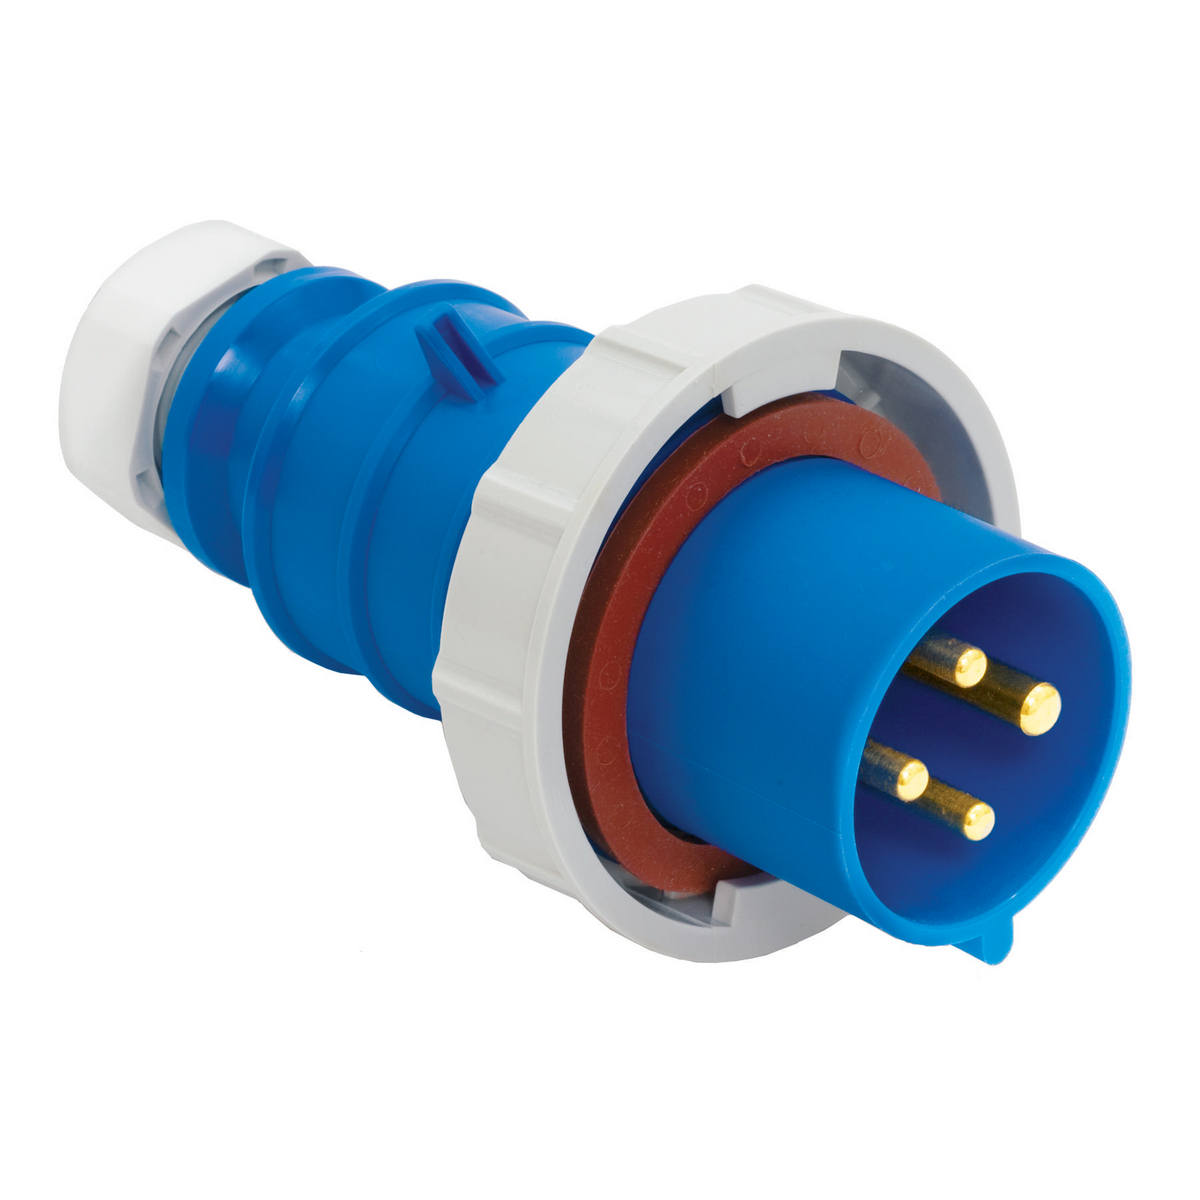 NEW Details about   SINE CA-A503-0108-A Male 3P  Insert Plug Receptacle Assembly  Blue 